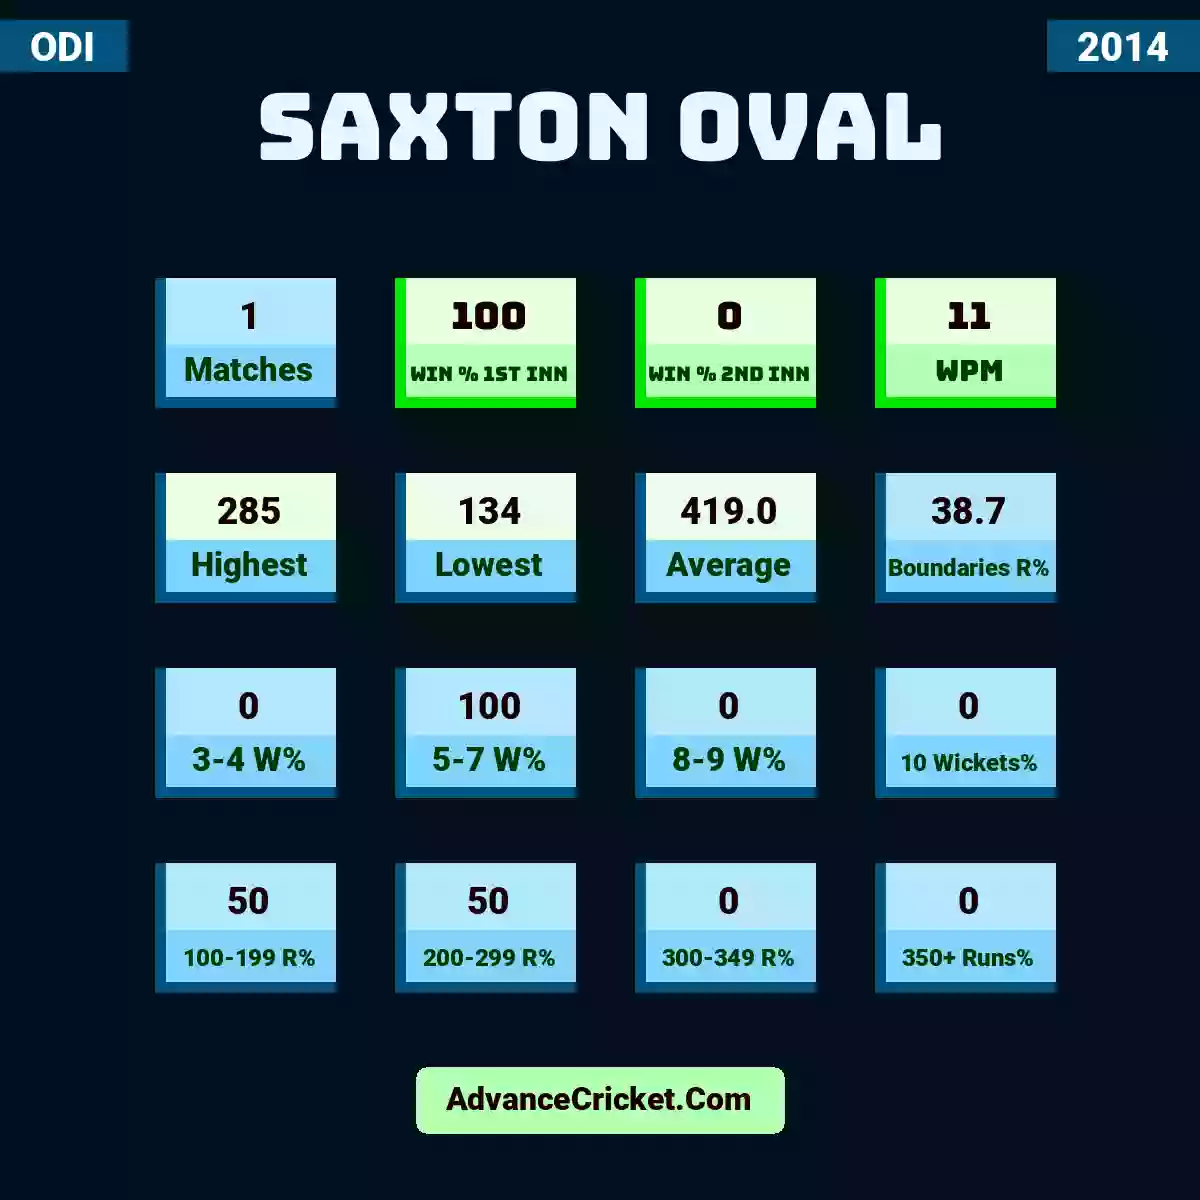 Image showing Saxton Oval with Matches: 1, Win % 1st Inn: 100, Win % 2nd Inn: 0, WPM: 11, Highest: 285, Lowest: 134, Average: 419.0, Boundaries R%: 38.7, 3-4 W%: 0, 5-7 W%: 100, 8-9 W%: 0, 10 Wickets%: 0, 100-199 R%: 50, 200-299 R%: 50, 300-349 R%: 0, 350+ Runs%: 0.